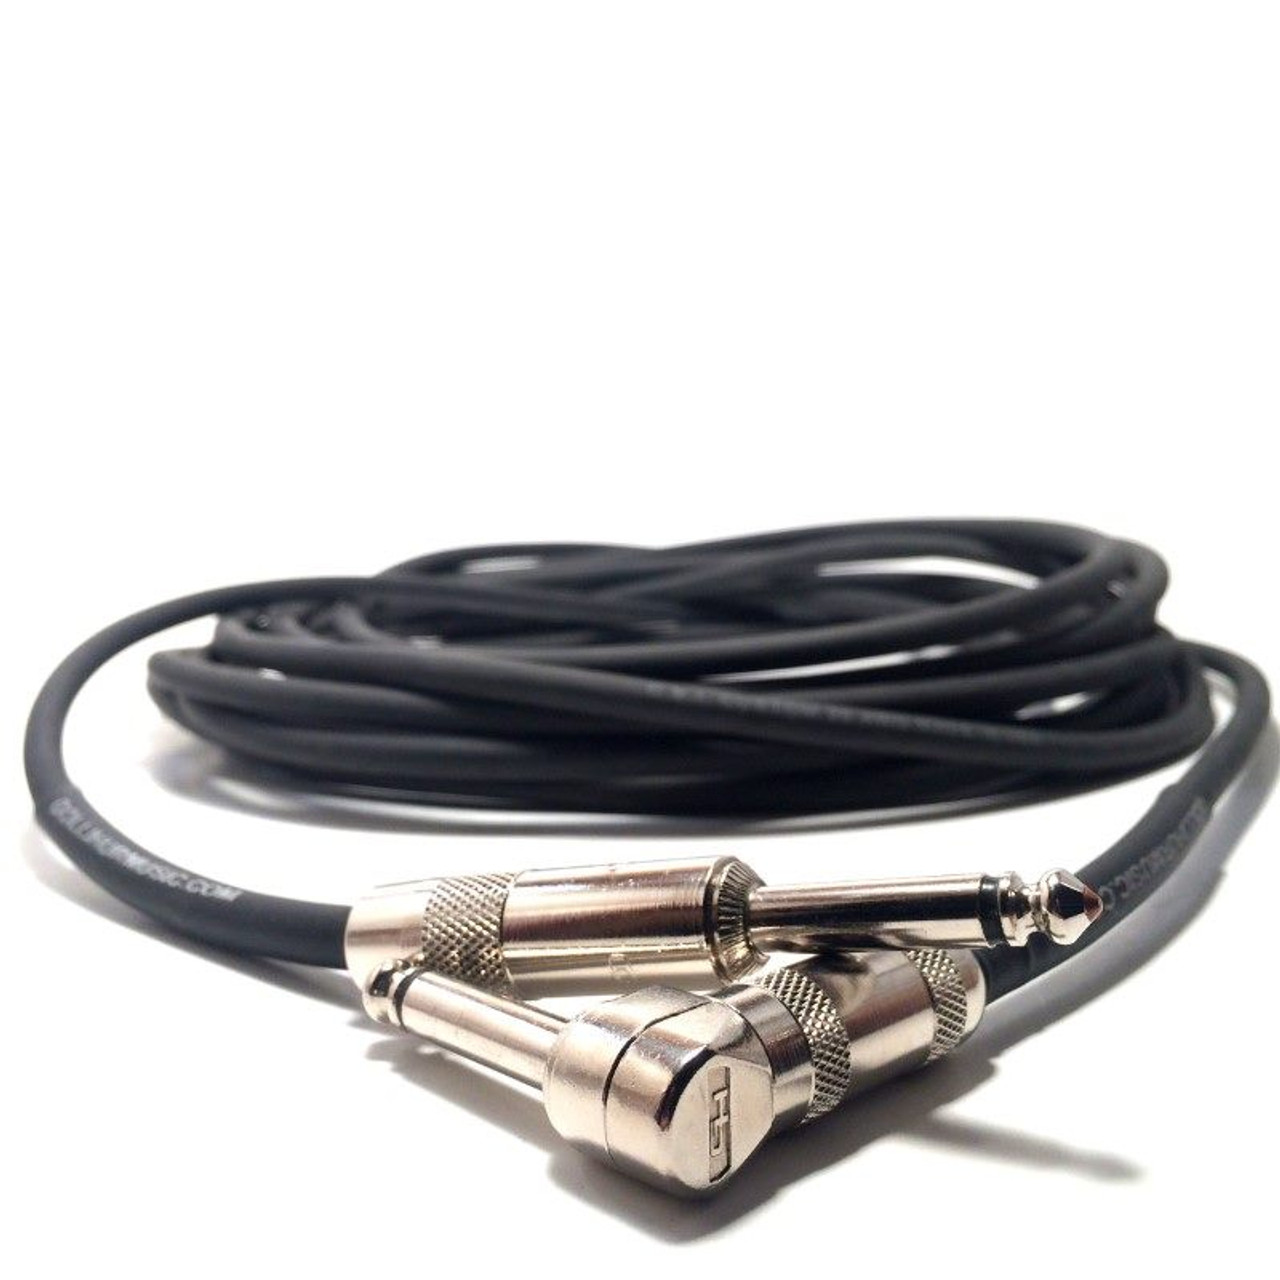 15 Feet CBI Ultimate Series 1/4 TRS to 1/4 TRS Guitar Instrument Cable